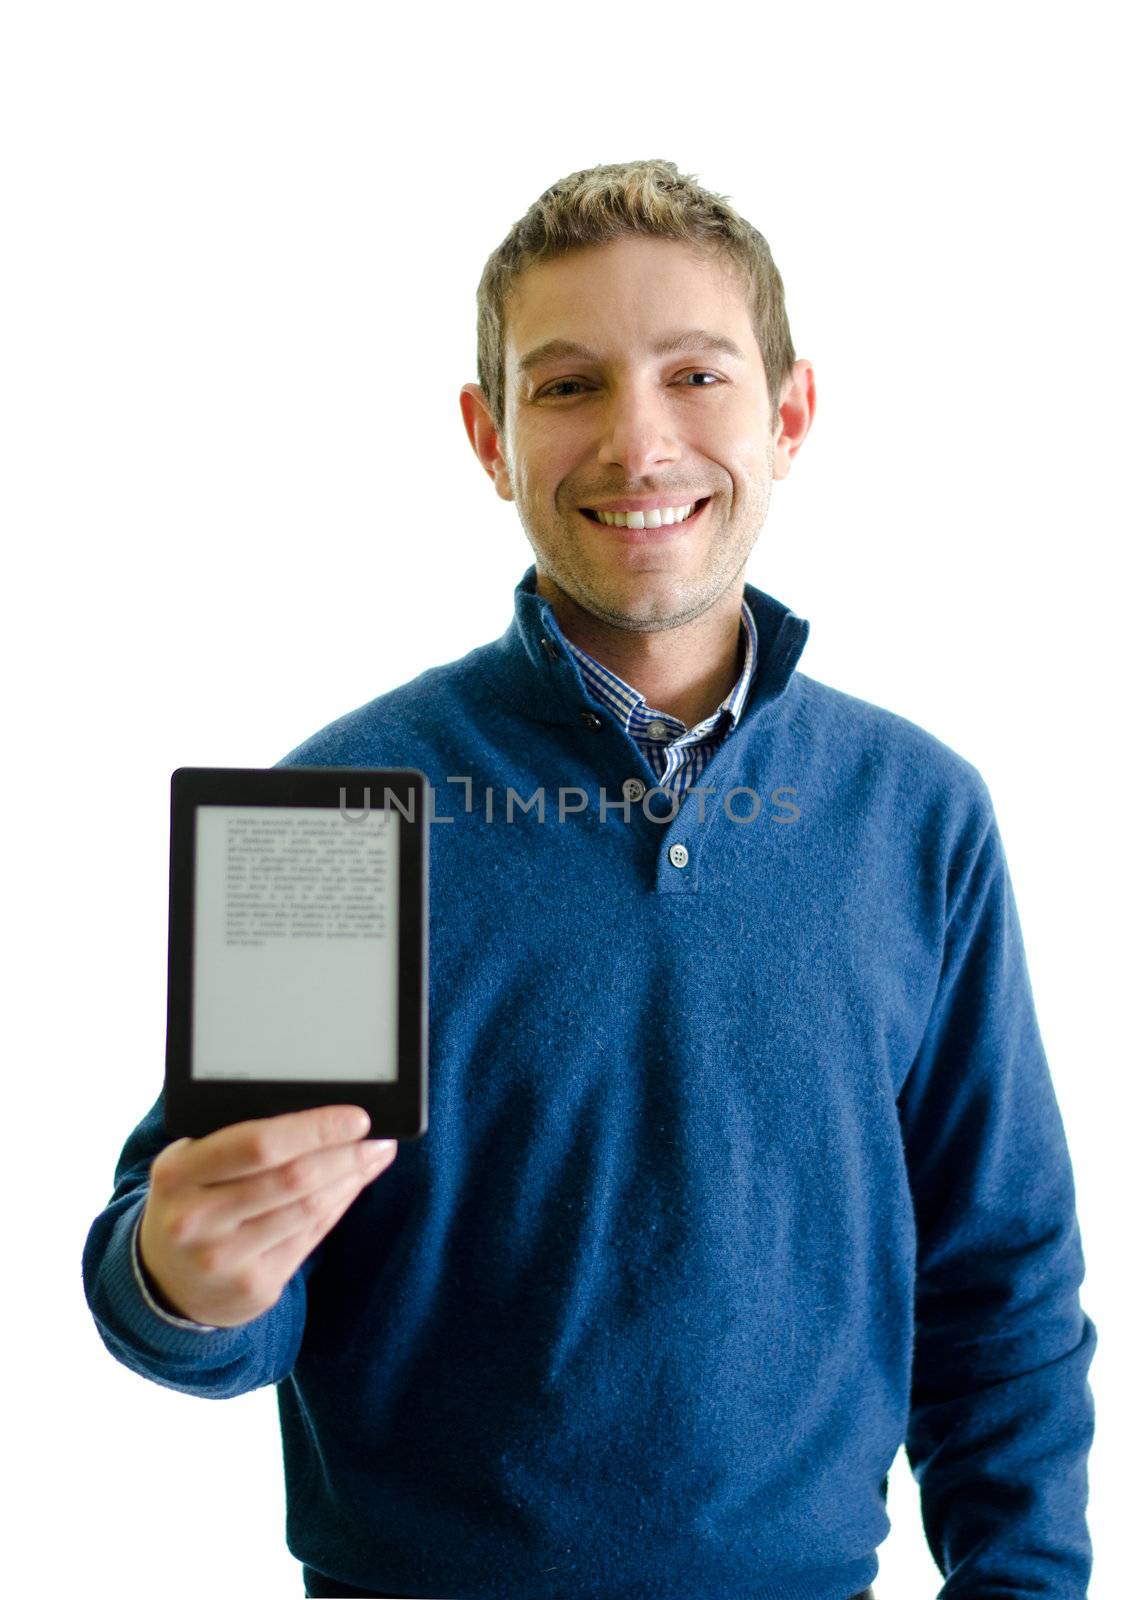 Young man with ebook reader (e-reader) in his hand, smiling. Isolated on white